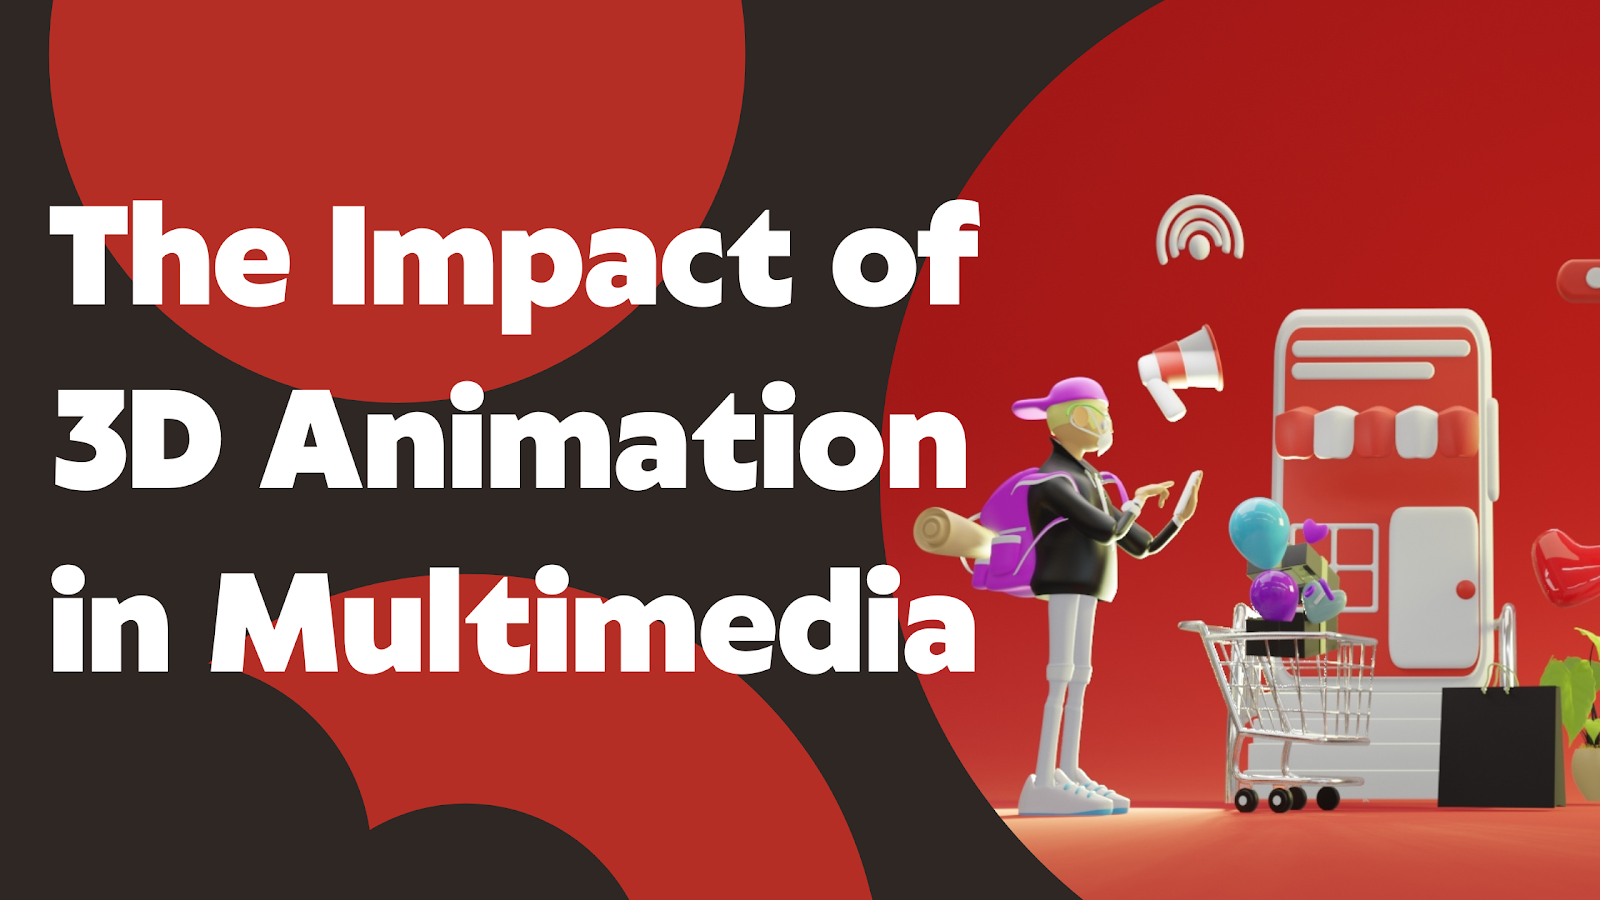 What Is the Impact of 3D Animation in Multimedia?